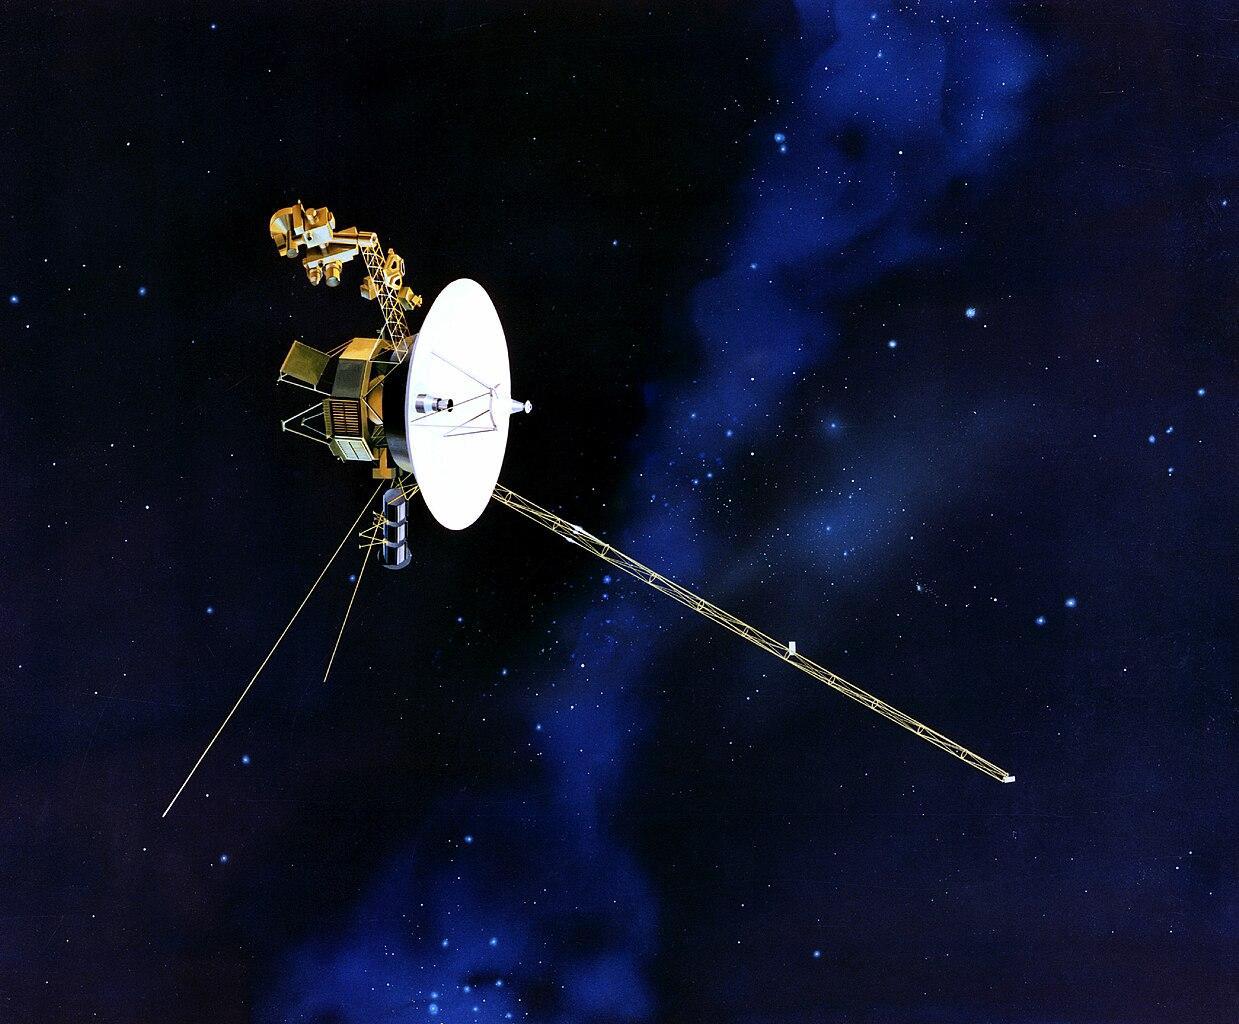 <p>One such mission saw the Voyager 1 probe embark on a one-way journey into the depths of space in 1977. According to <a href="https://www.jpl.nasa.gov/news/nasas-voyager-1-resumes-sending-engineering-updates-to-earth">NASA</a>, as of April 2024, the small craft is still sending updates back to Earth.  </p> <p>Over the past five decades, the probe has ventured deep into our galaxy and is currently recognized as the farthest man-made object from our world. It continues to travel around 15 billion miles from the sun. </p>